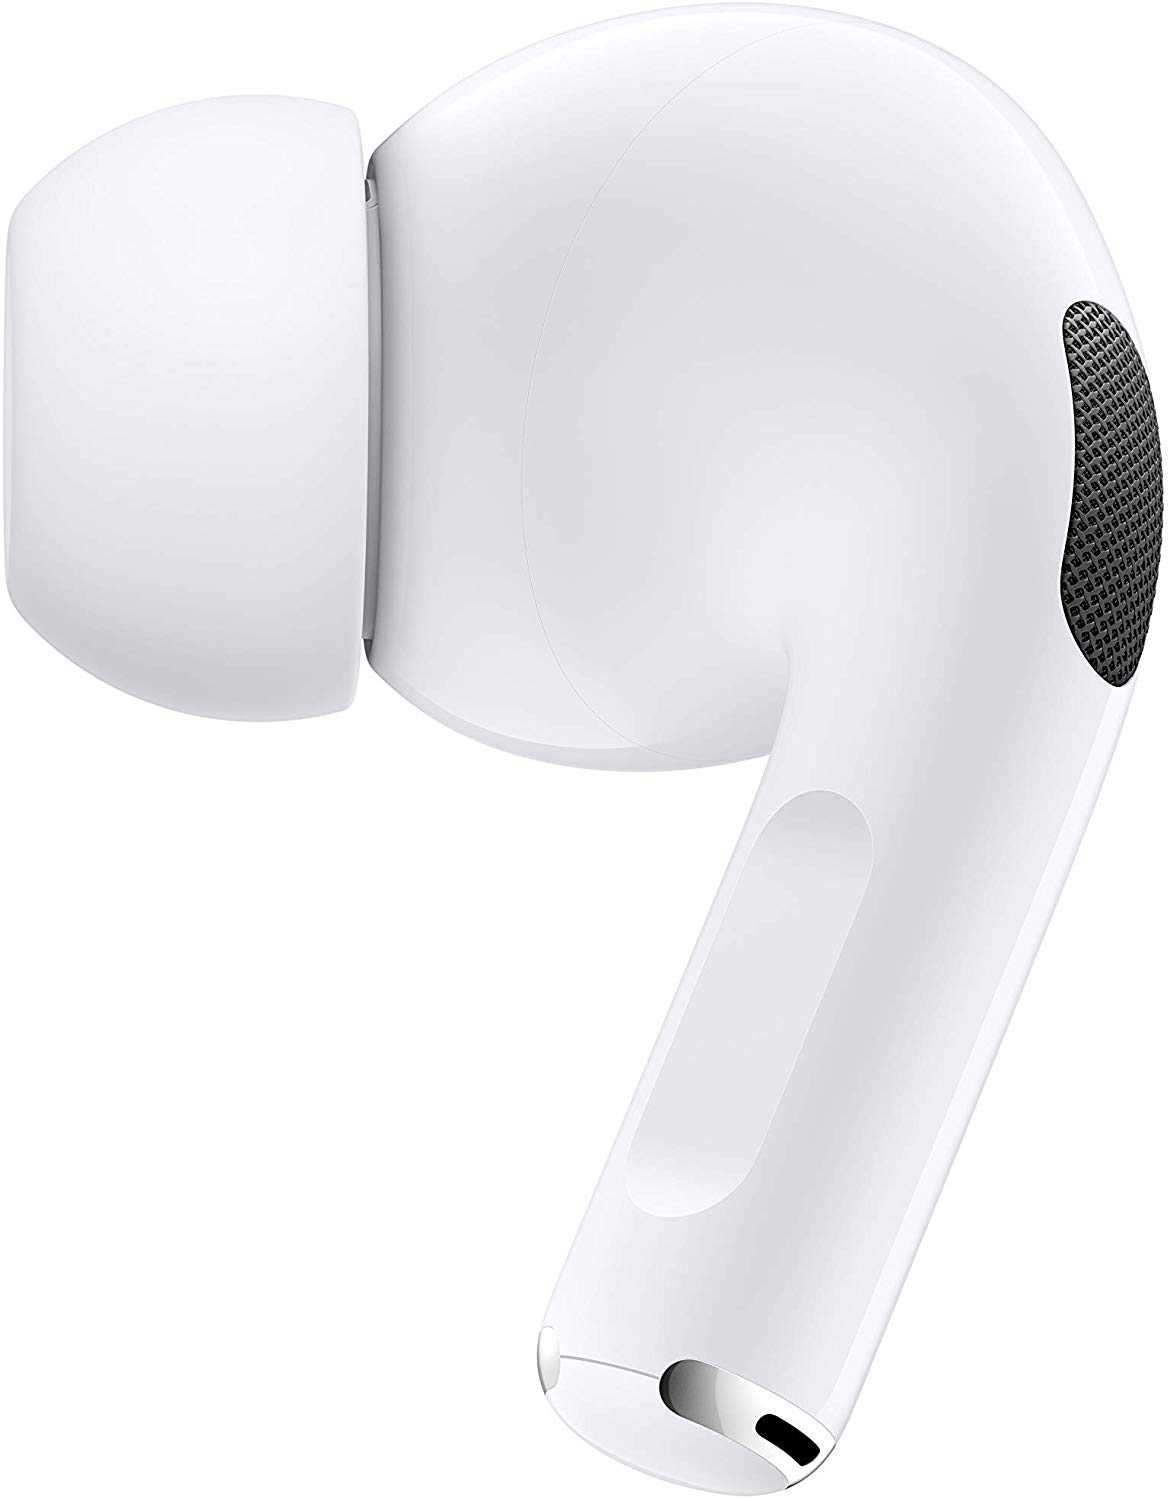 Apple AirPods Pro for sale in Jamaica | www.semadata.org